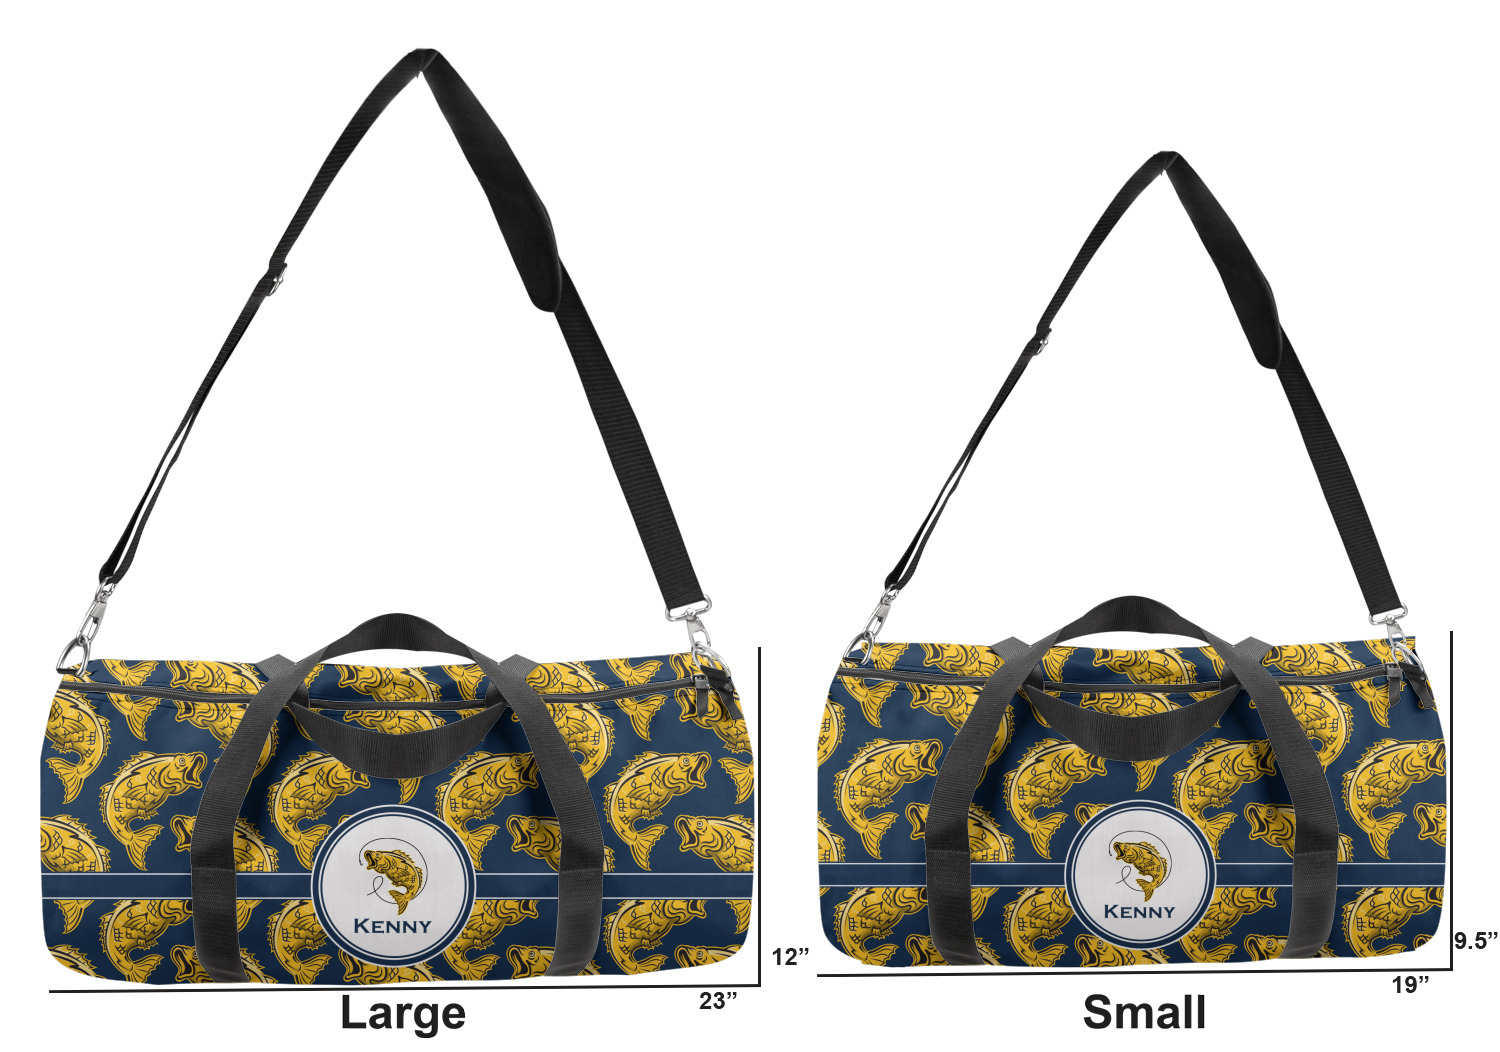 https://www.youcustomizeit.com/common/MAKE/341734/Fish-Duffle-Bag-Small-and-Large.jpg?lm=1688410420